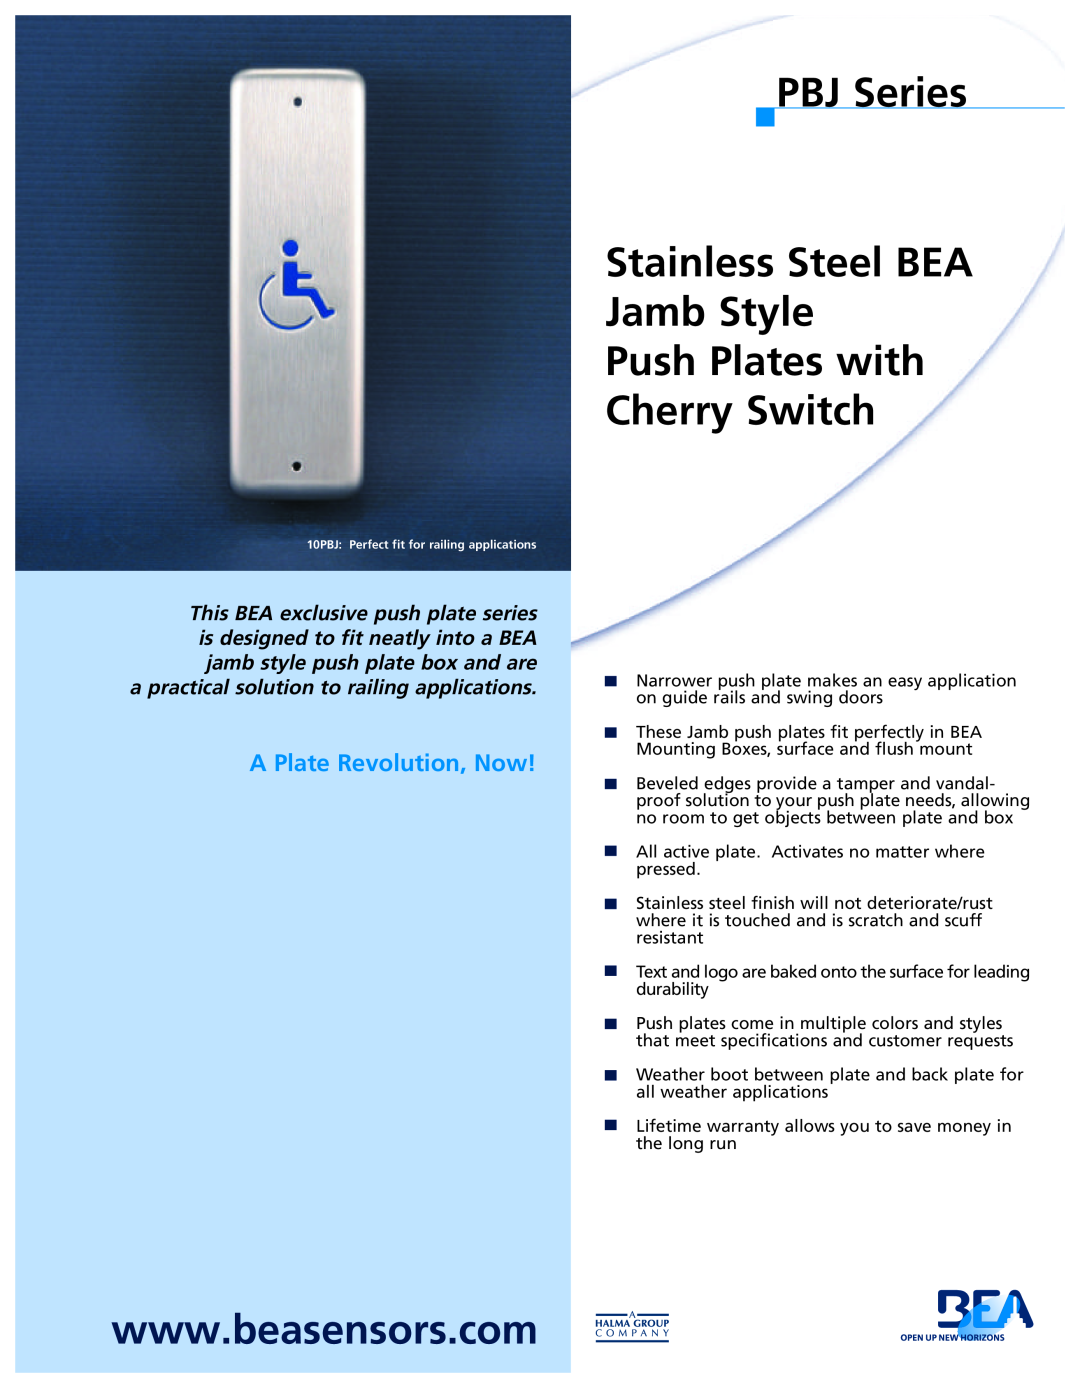 BEA specifications PBJ Series Stainless Steel BEA Jamb Style, Push Plates with Cherry Switch, A Plate Revolution, Now 